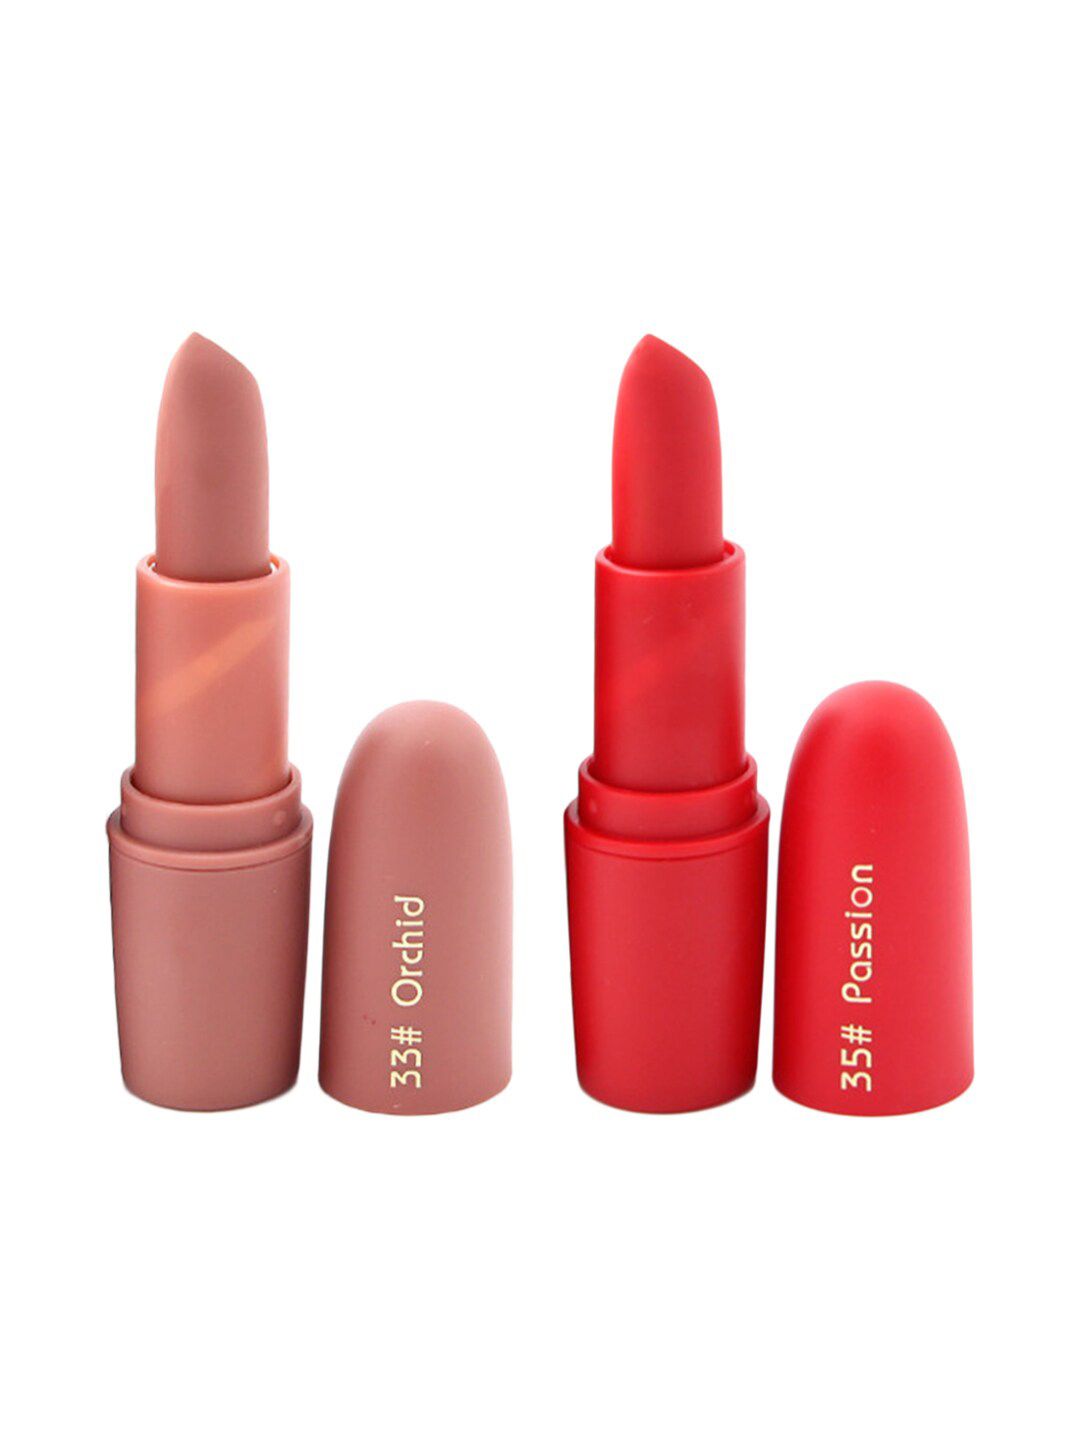 MISS ROSE Set of 2 Matte Creamy Lipsticks - Orchid 33 & Passion 35 Price in India